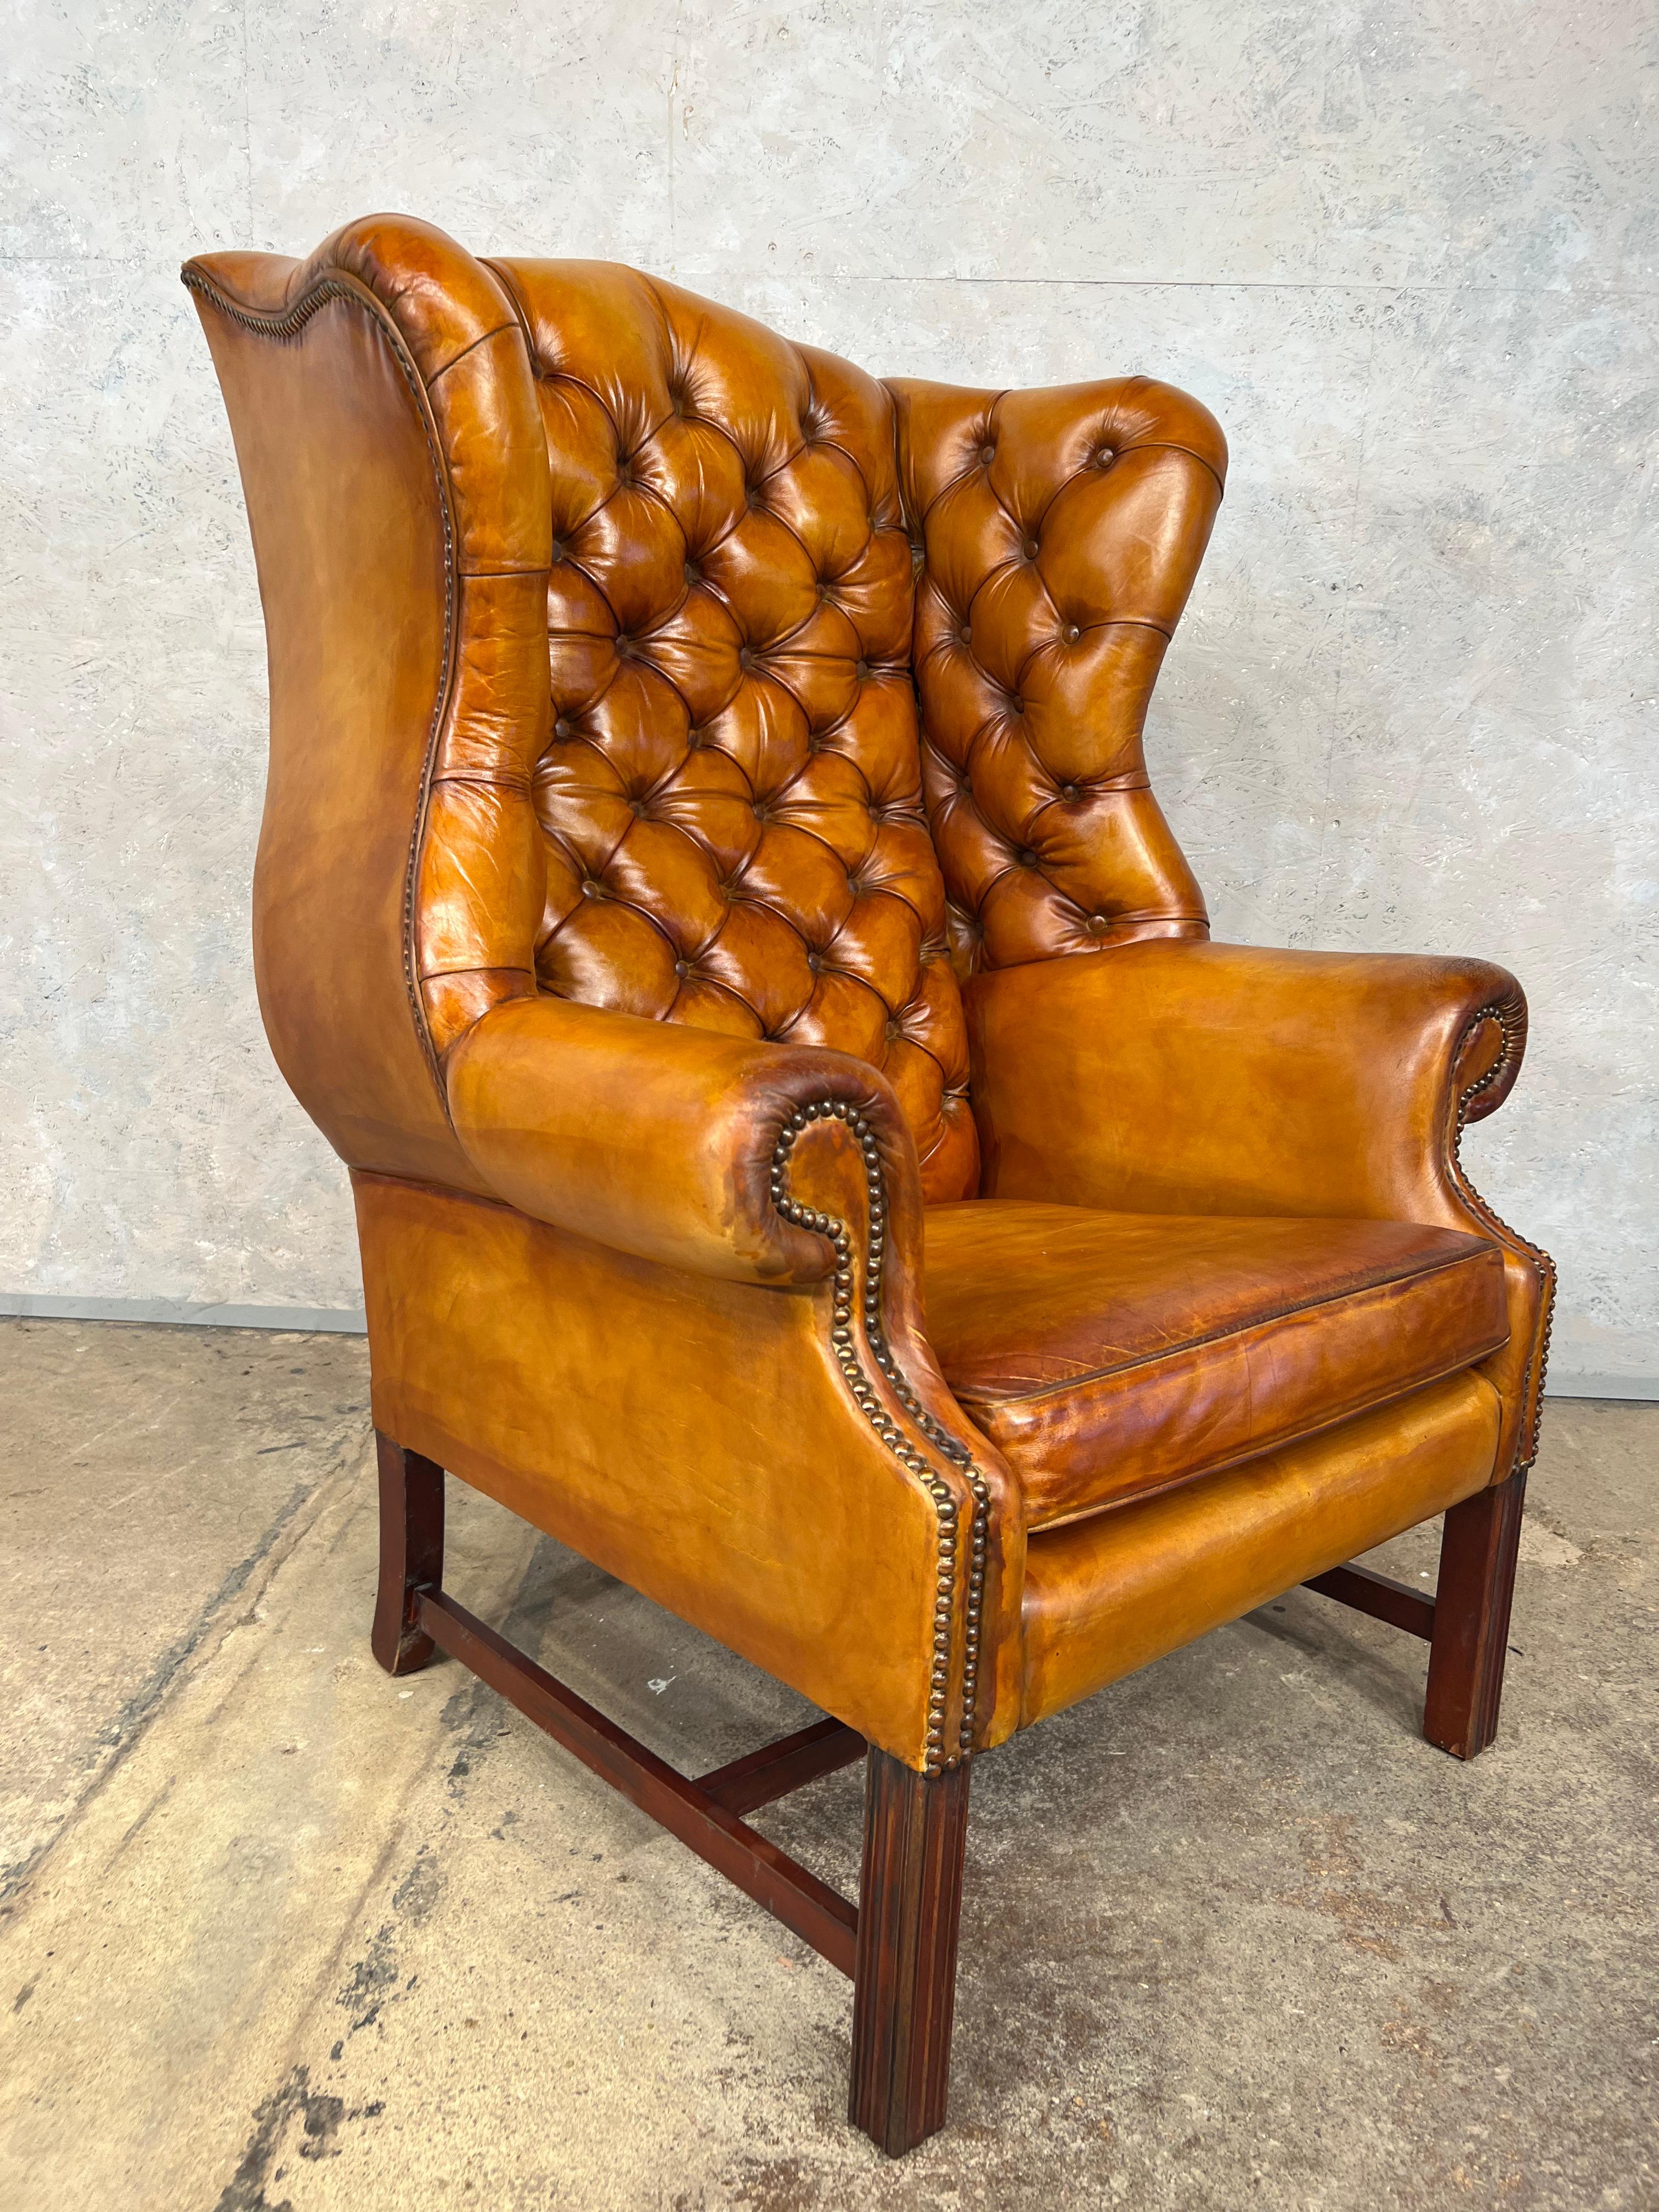 An exceptional leather chesterfiled wing back chair made by Wade vintage mid century

An beautiful light tan colour with a fantastic patina and finish. A generous sized wingback chair with a wide back, resting on fine Georgian straight feet, in